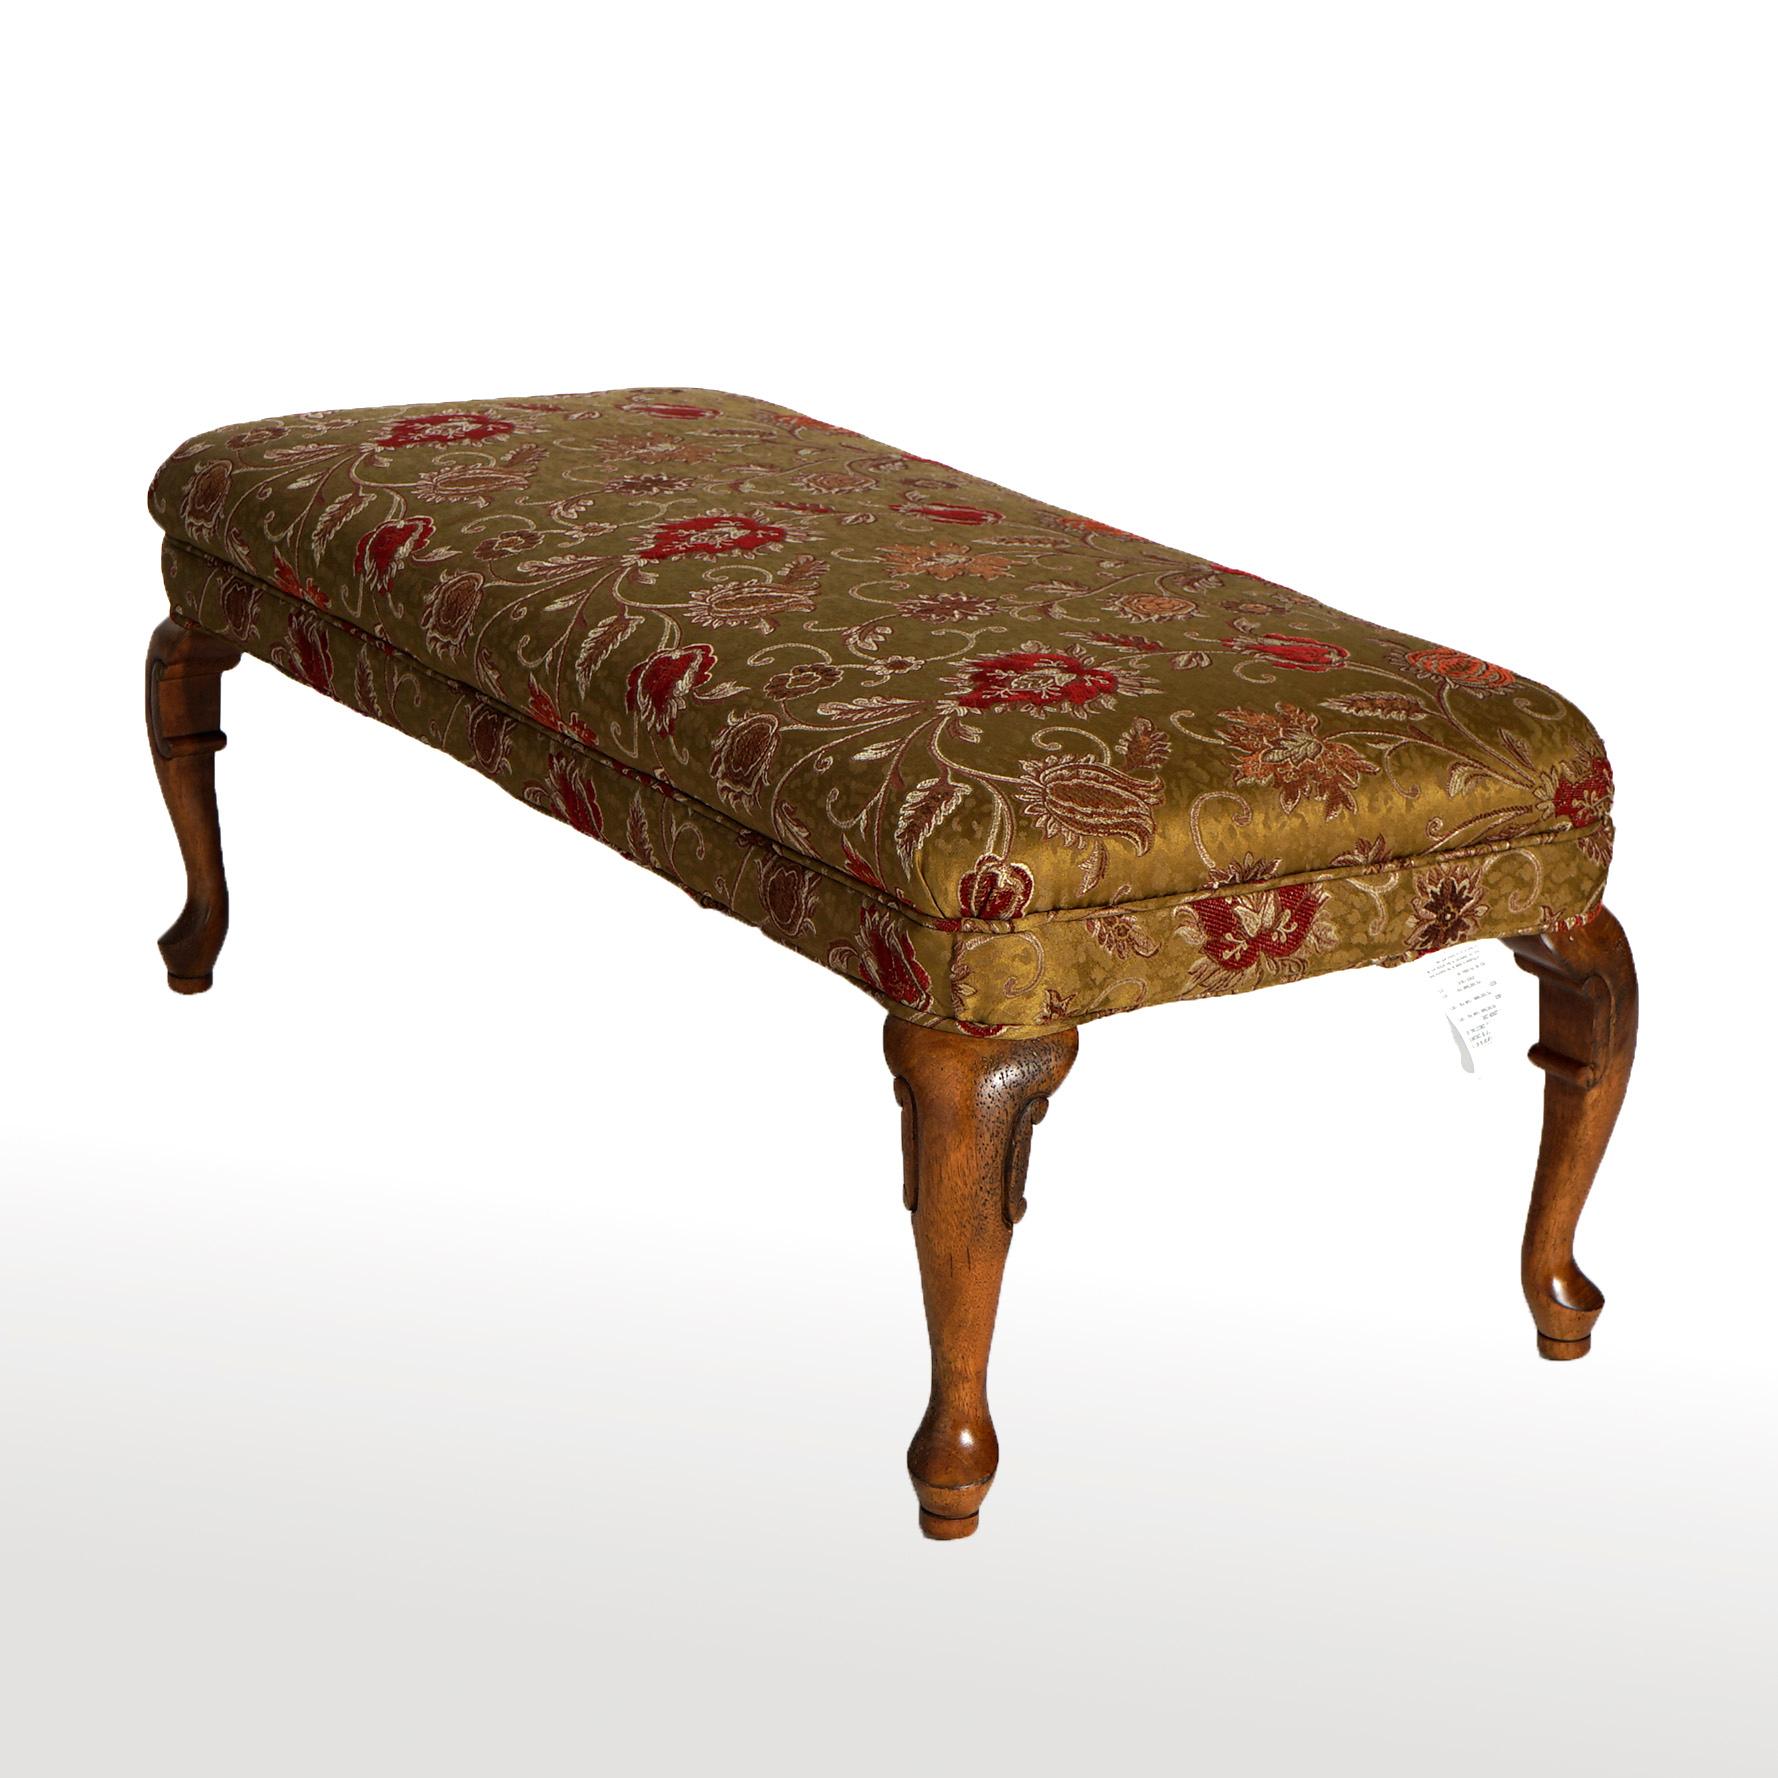 A Queen Anne style long bench offers upholstered seat raised on carved walnut cabriole legs terminating in pad feet, 20th century

Measures- 19''H x 46''W x 23.25''D.

Catalogue Note: Ask about DISCOUNTED DELIVERY RATES available to most regions